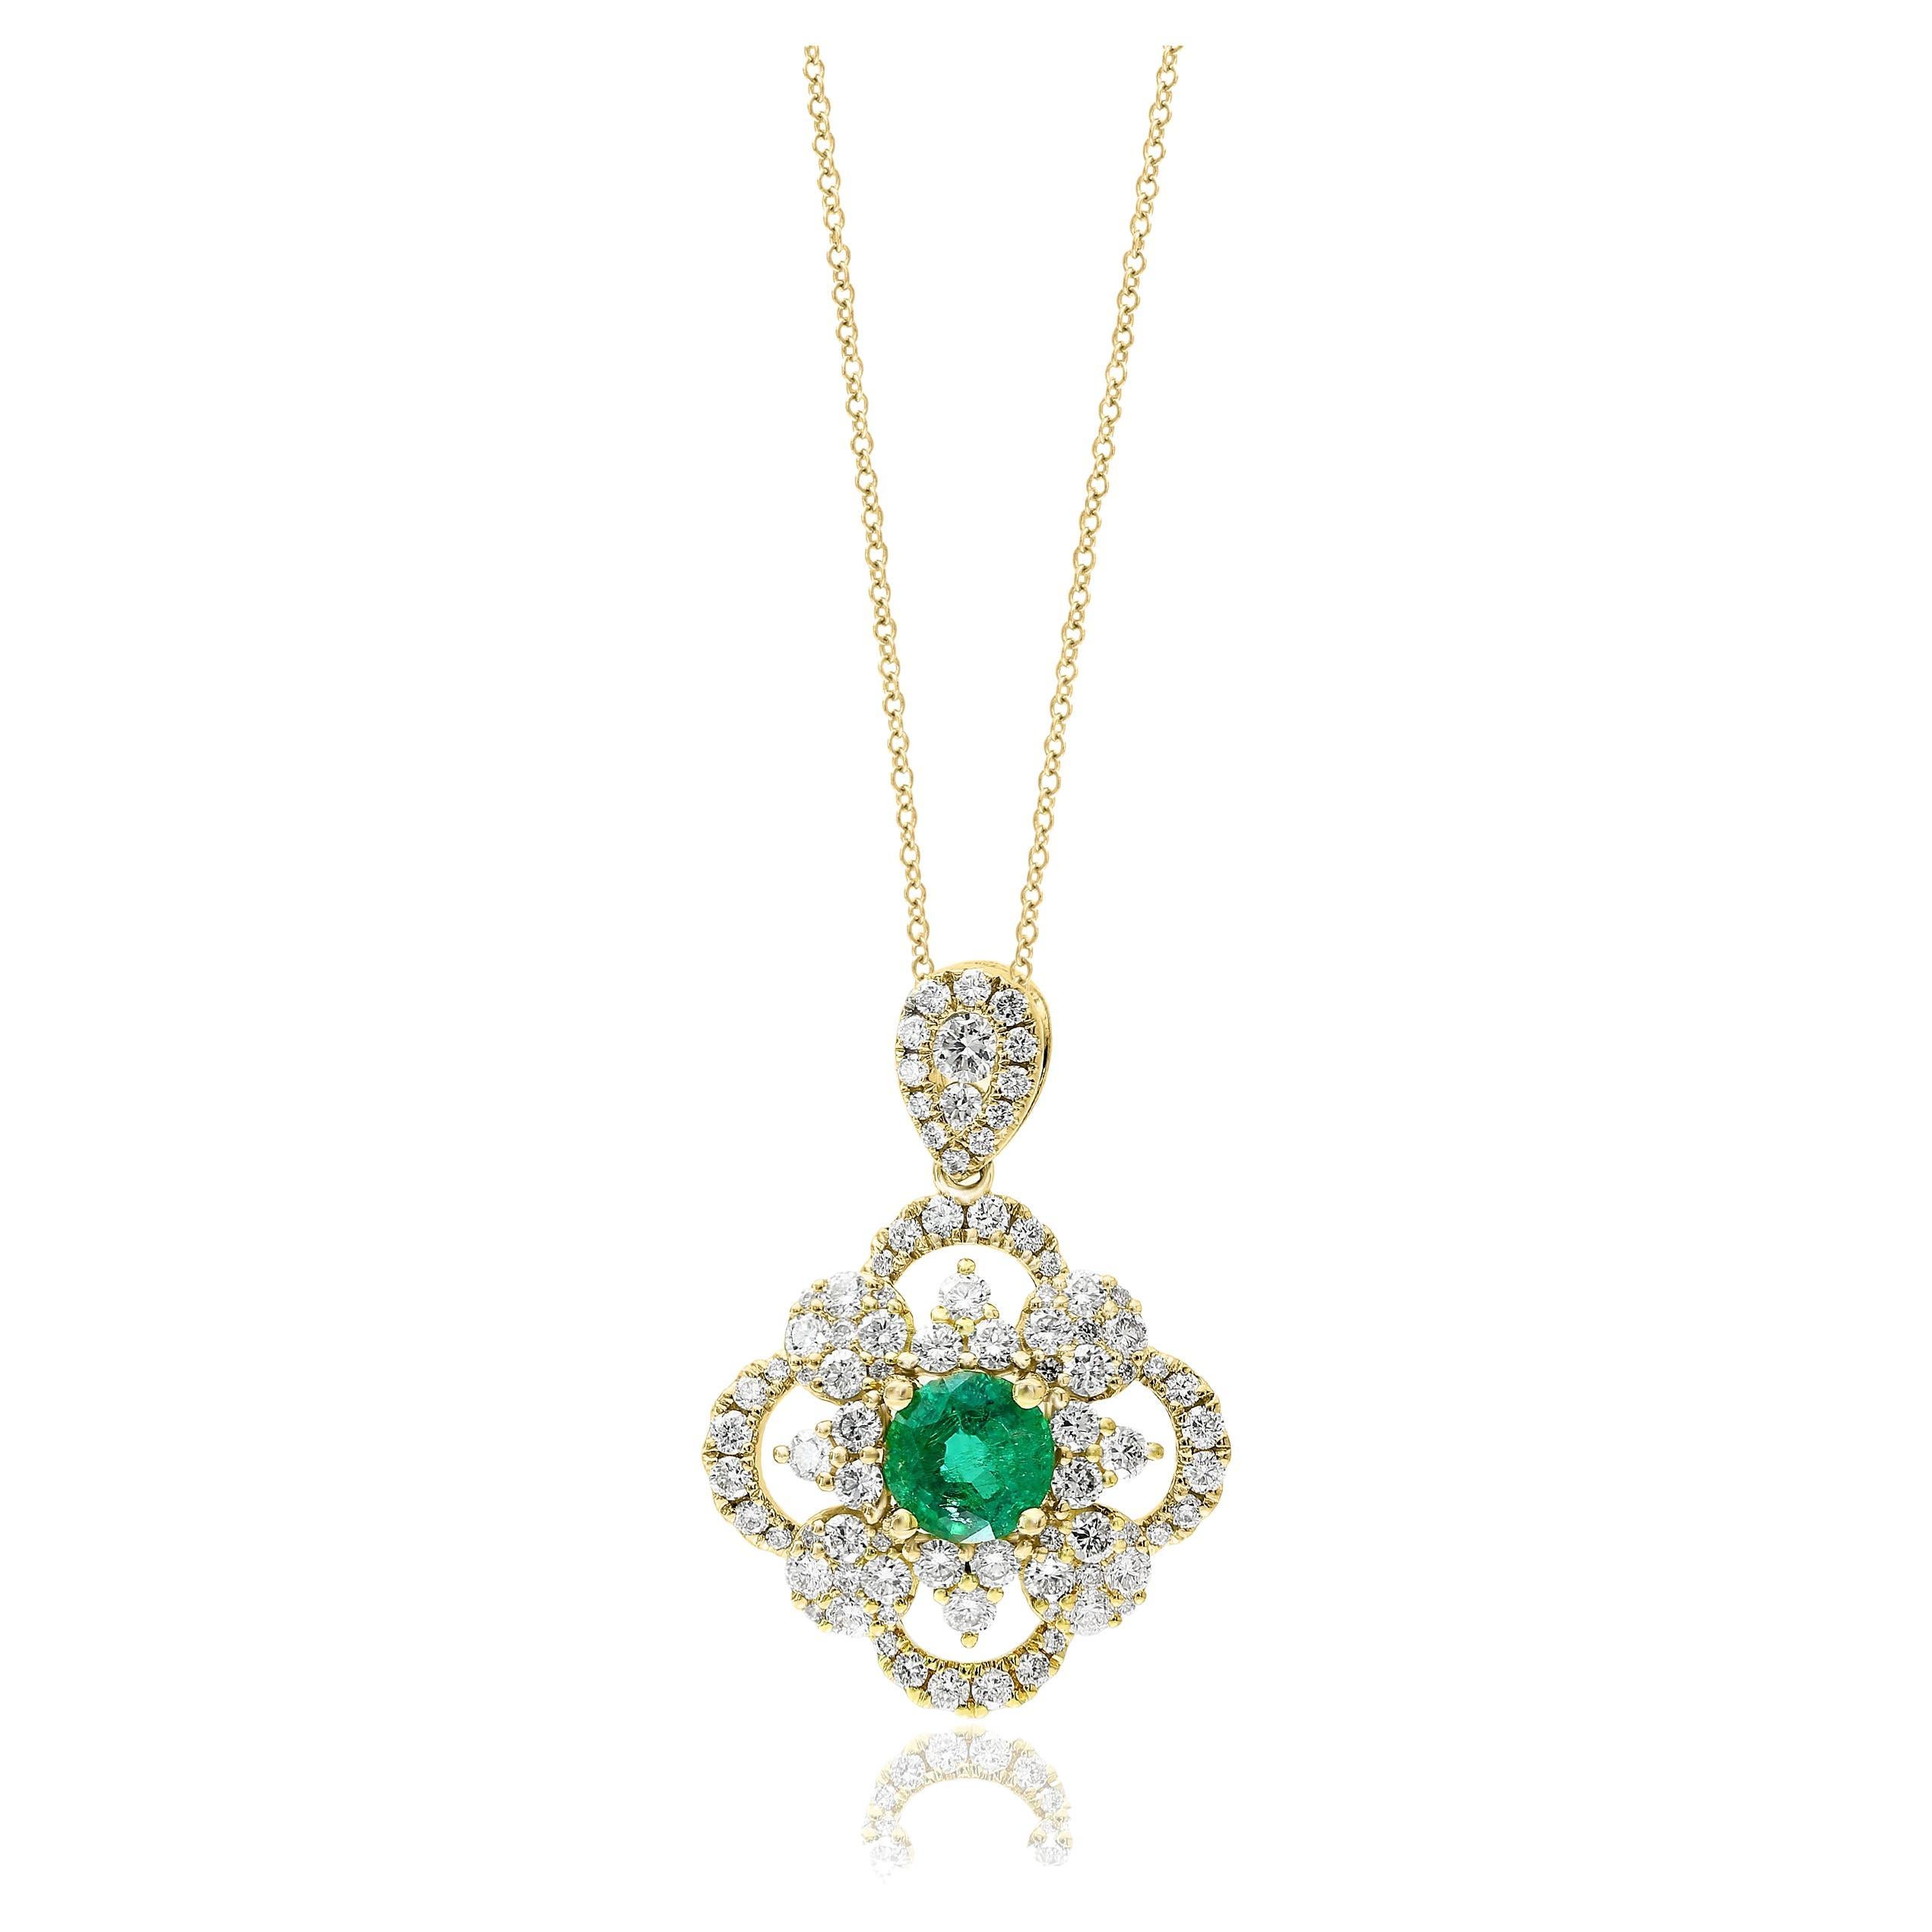 0.67 Carat Round Cut Emerald and Diamond Pendant Necklace in 18K Yellow Gold